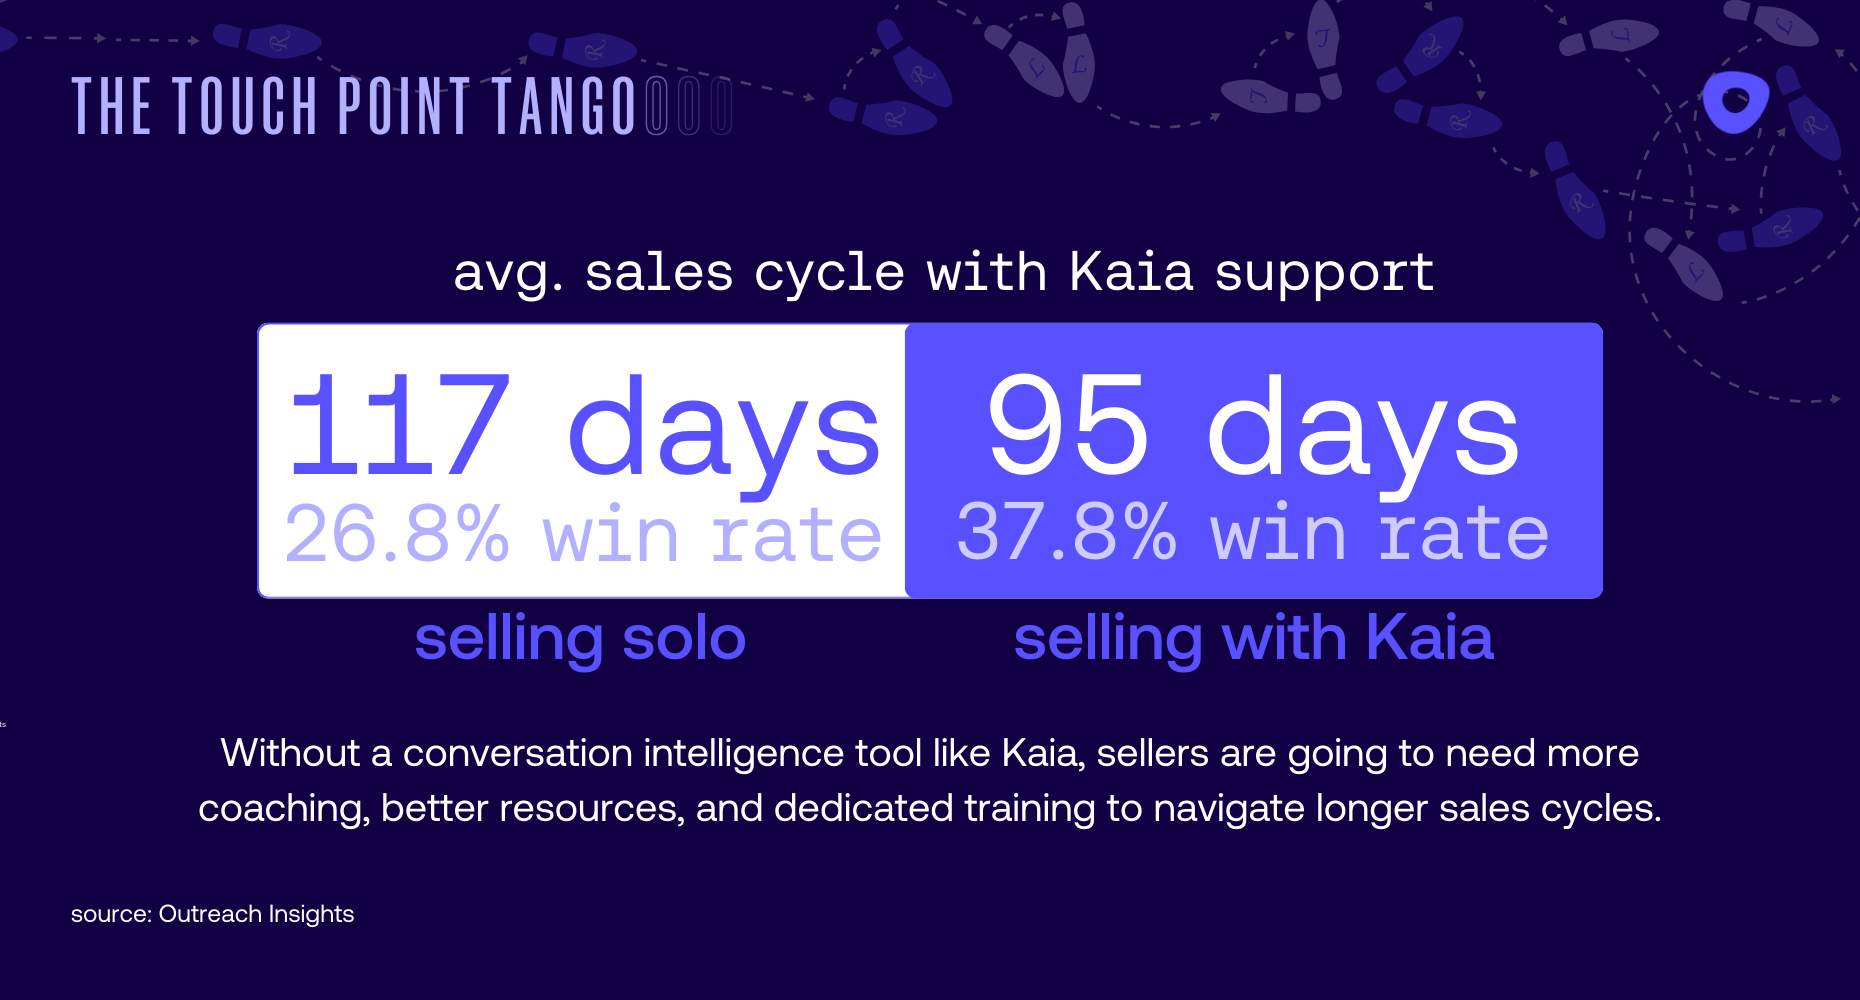 Data from Kaia, Outreach’s Conversational Intelligence software